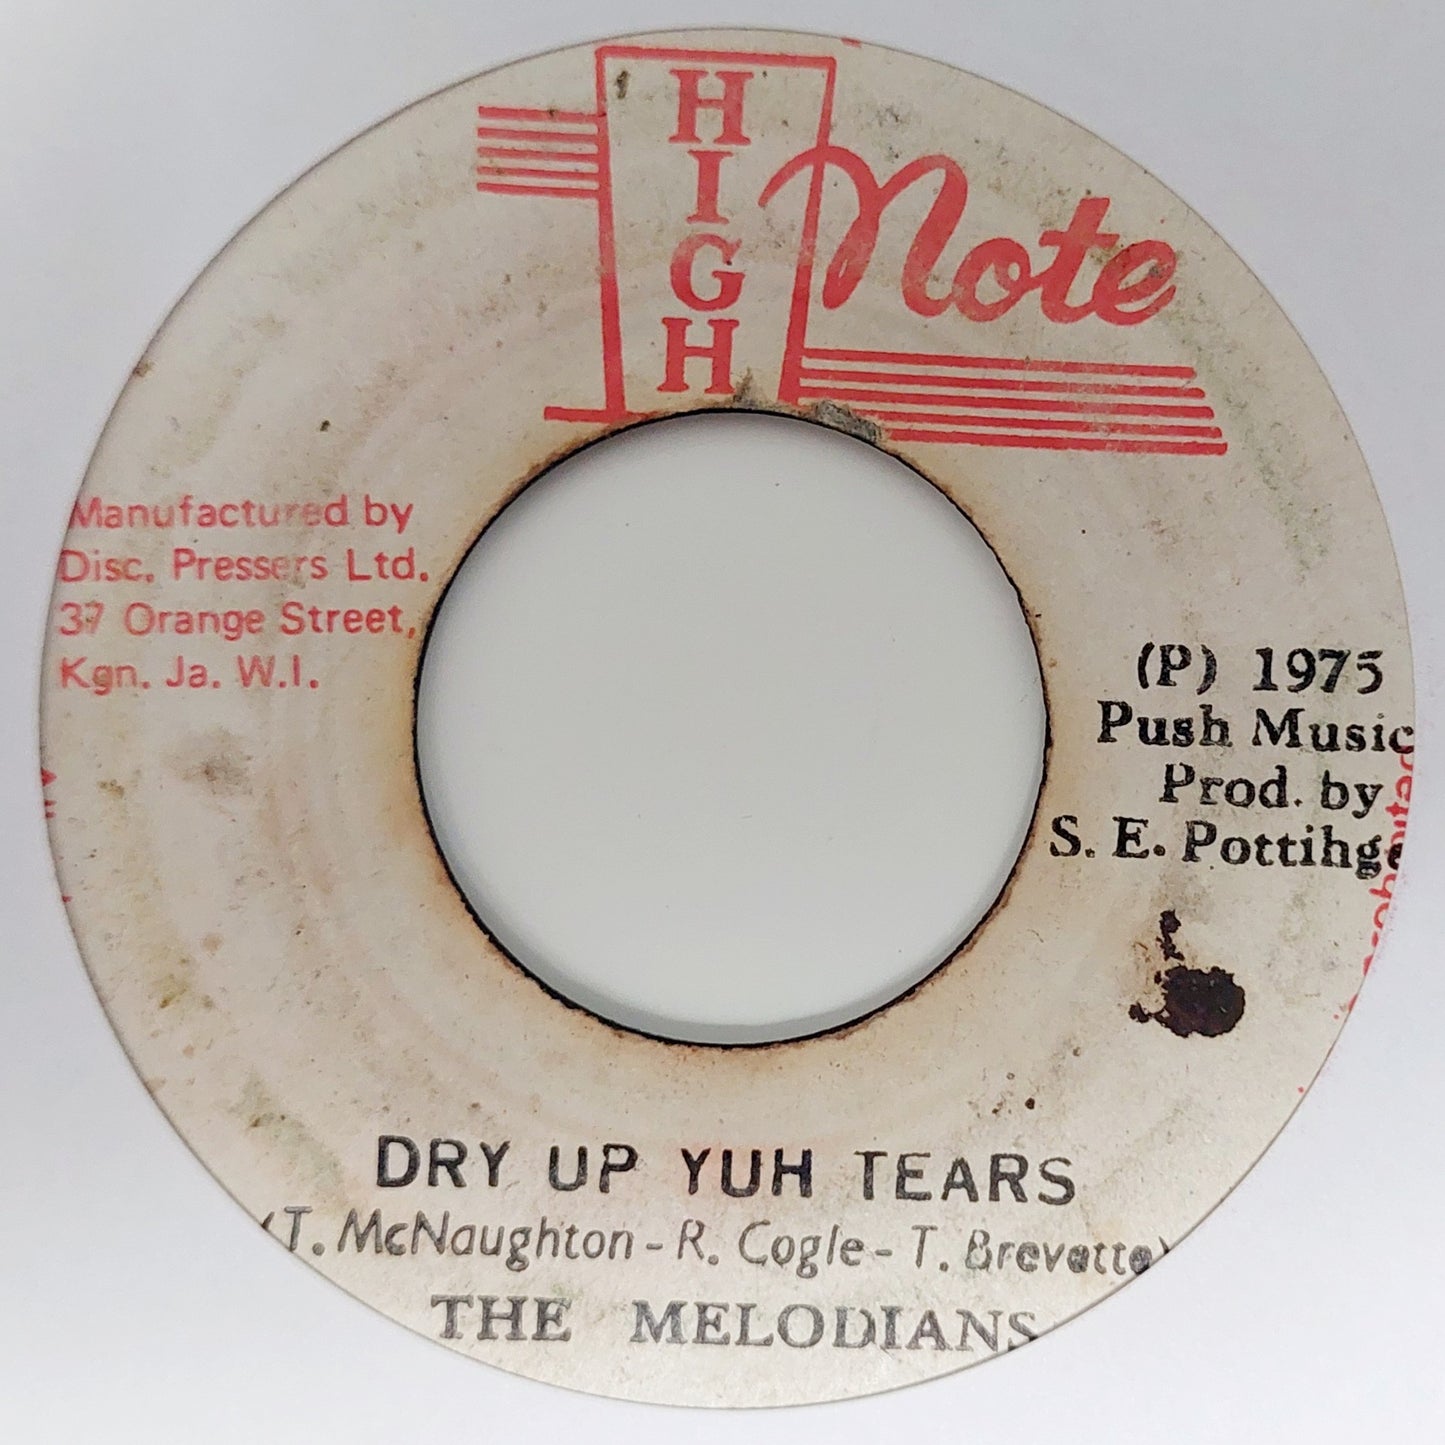 The Melodians - Dry Up Your Tears